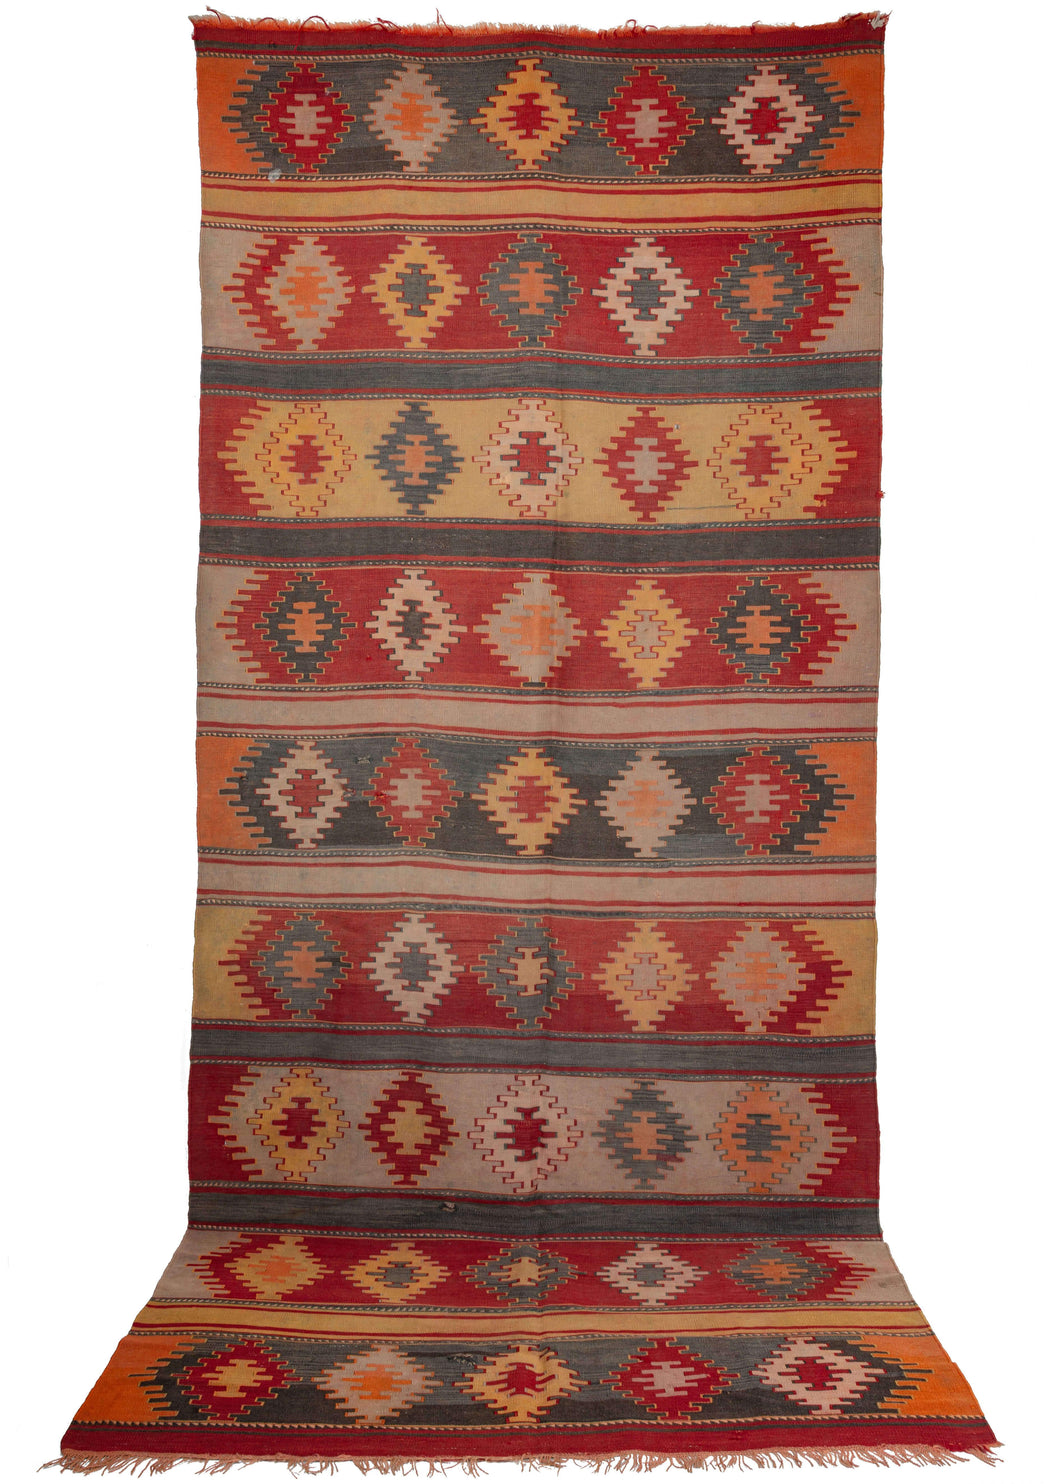 Vintage Turkish Kilim that features horizontal rows of serrated diamonds each separated by a thin unadorned band. An uncommon combination of red, yellow, gray, charcoal and orange give it an interesting and distinctive feel. 